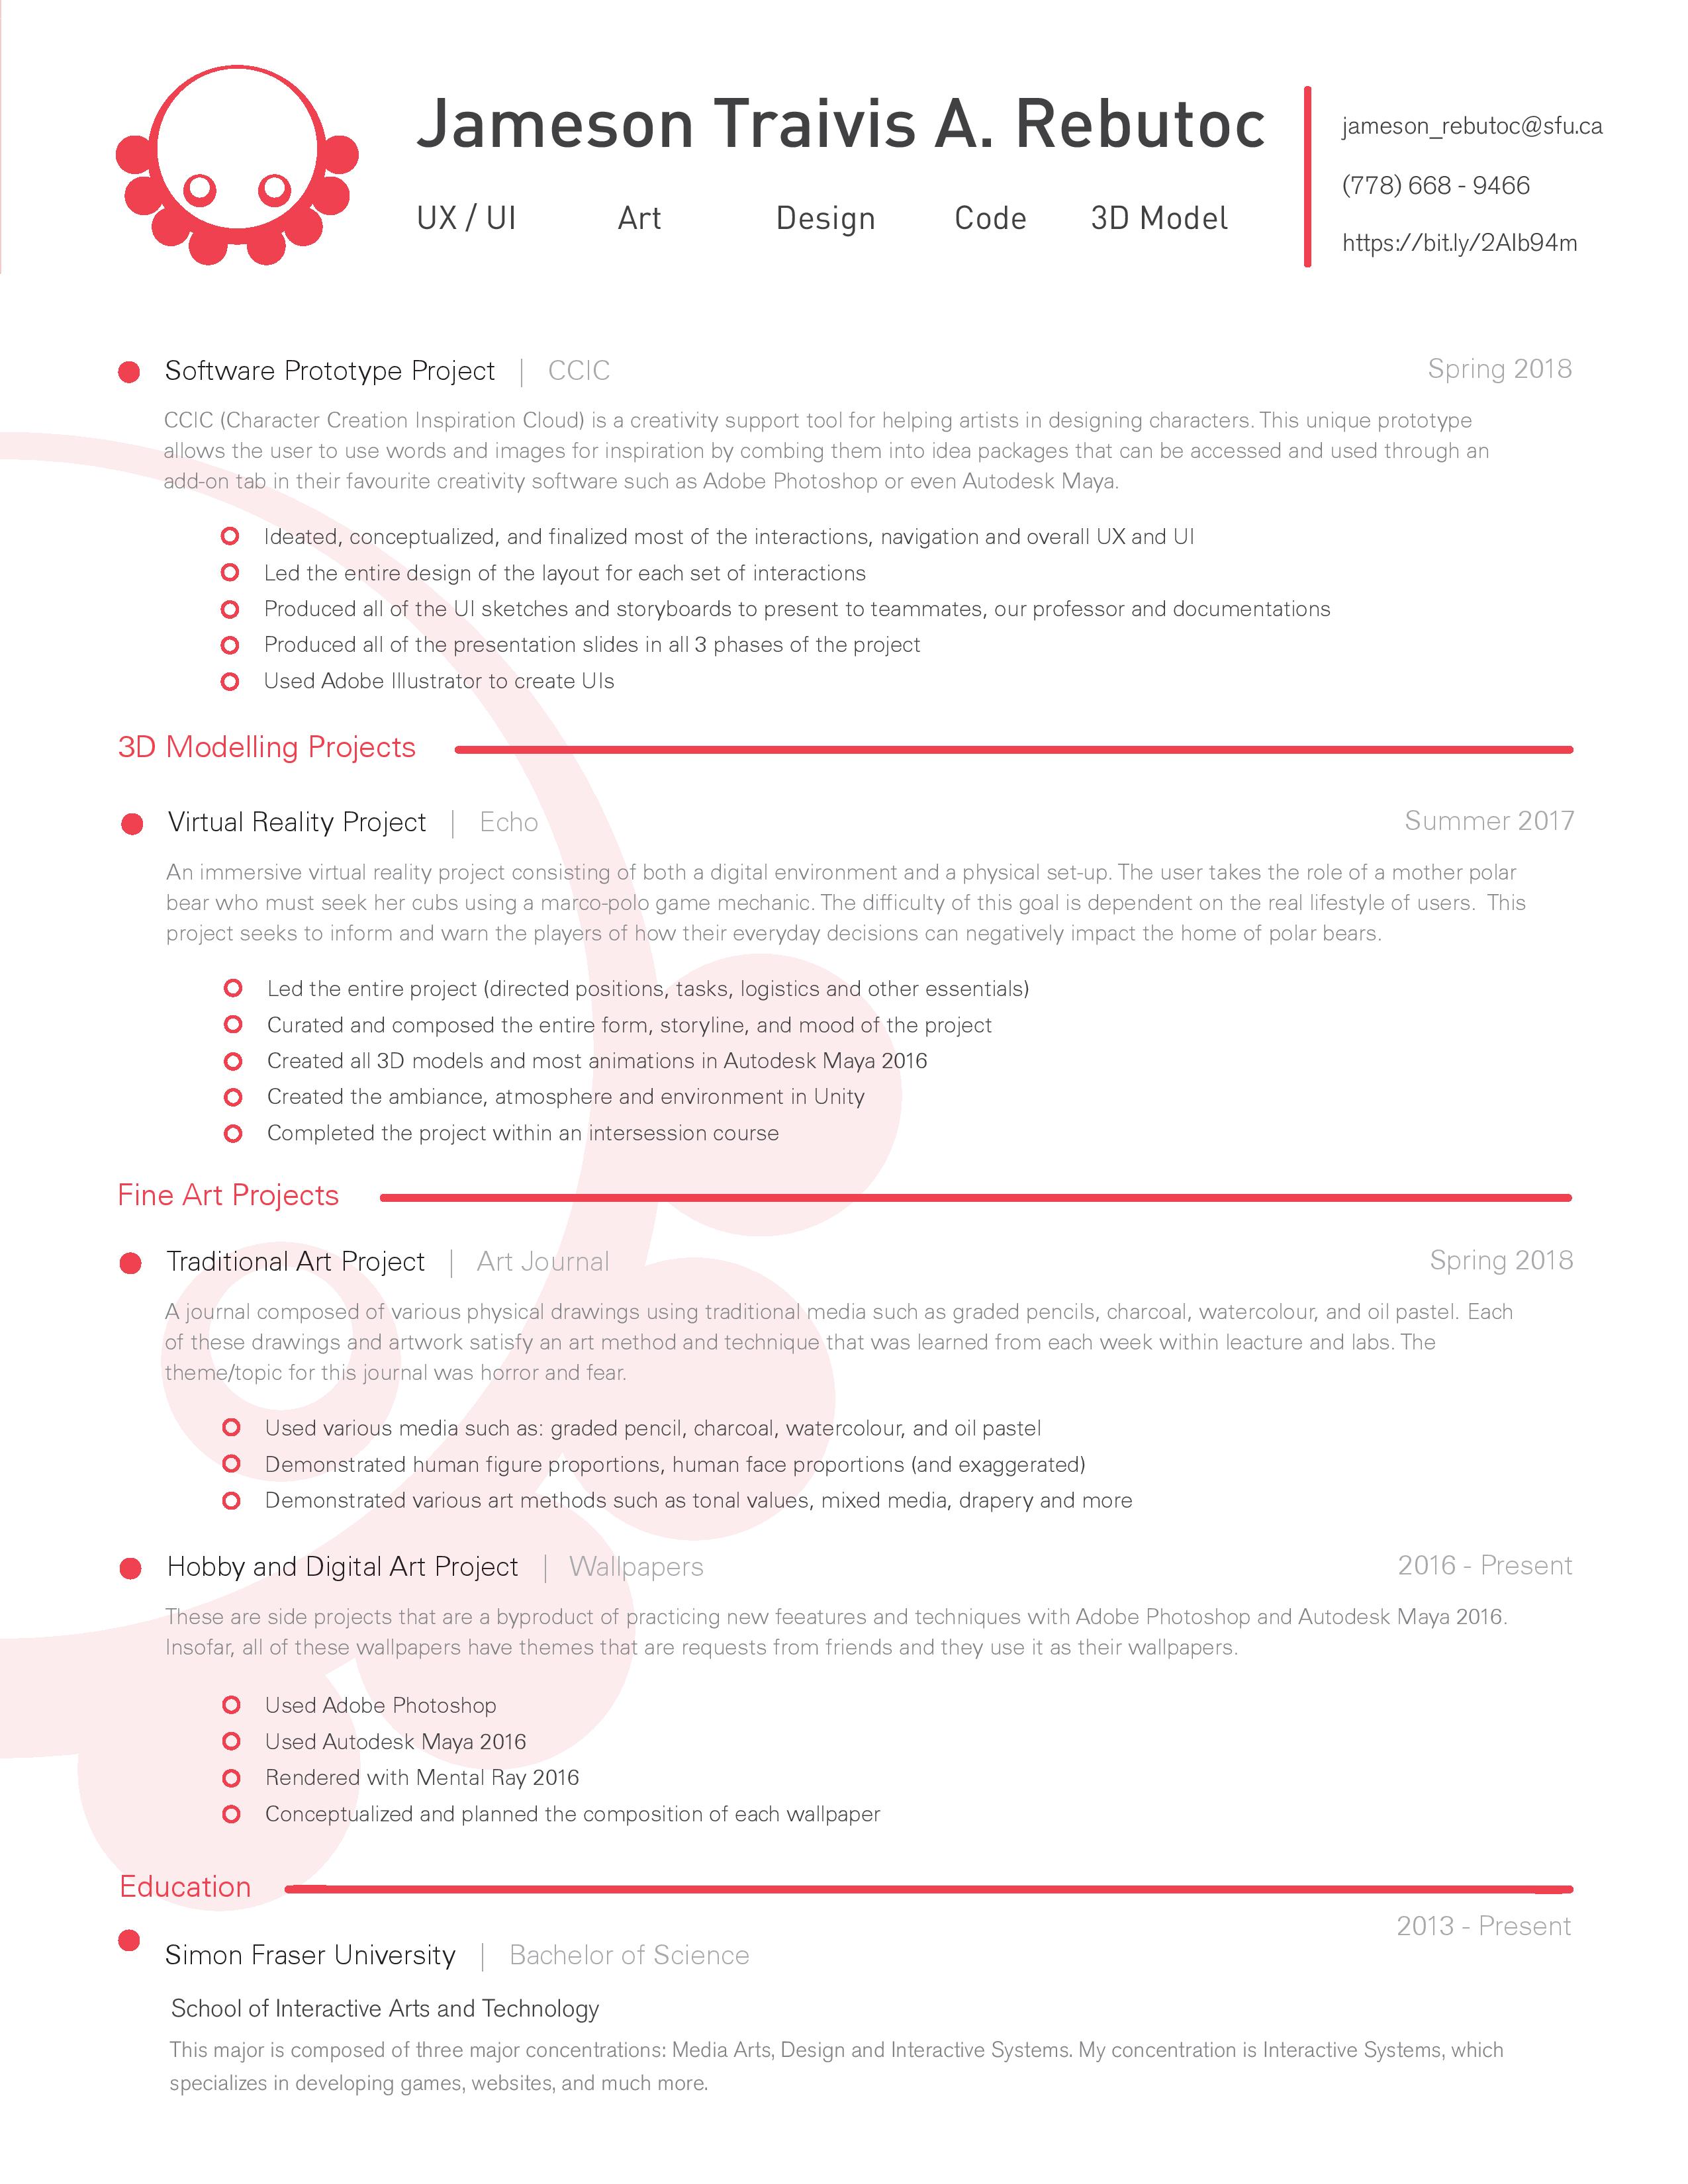 Image of Page 2 of Jameson's UX/UI Resume